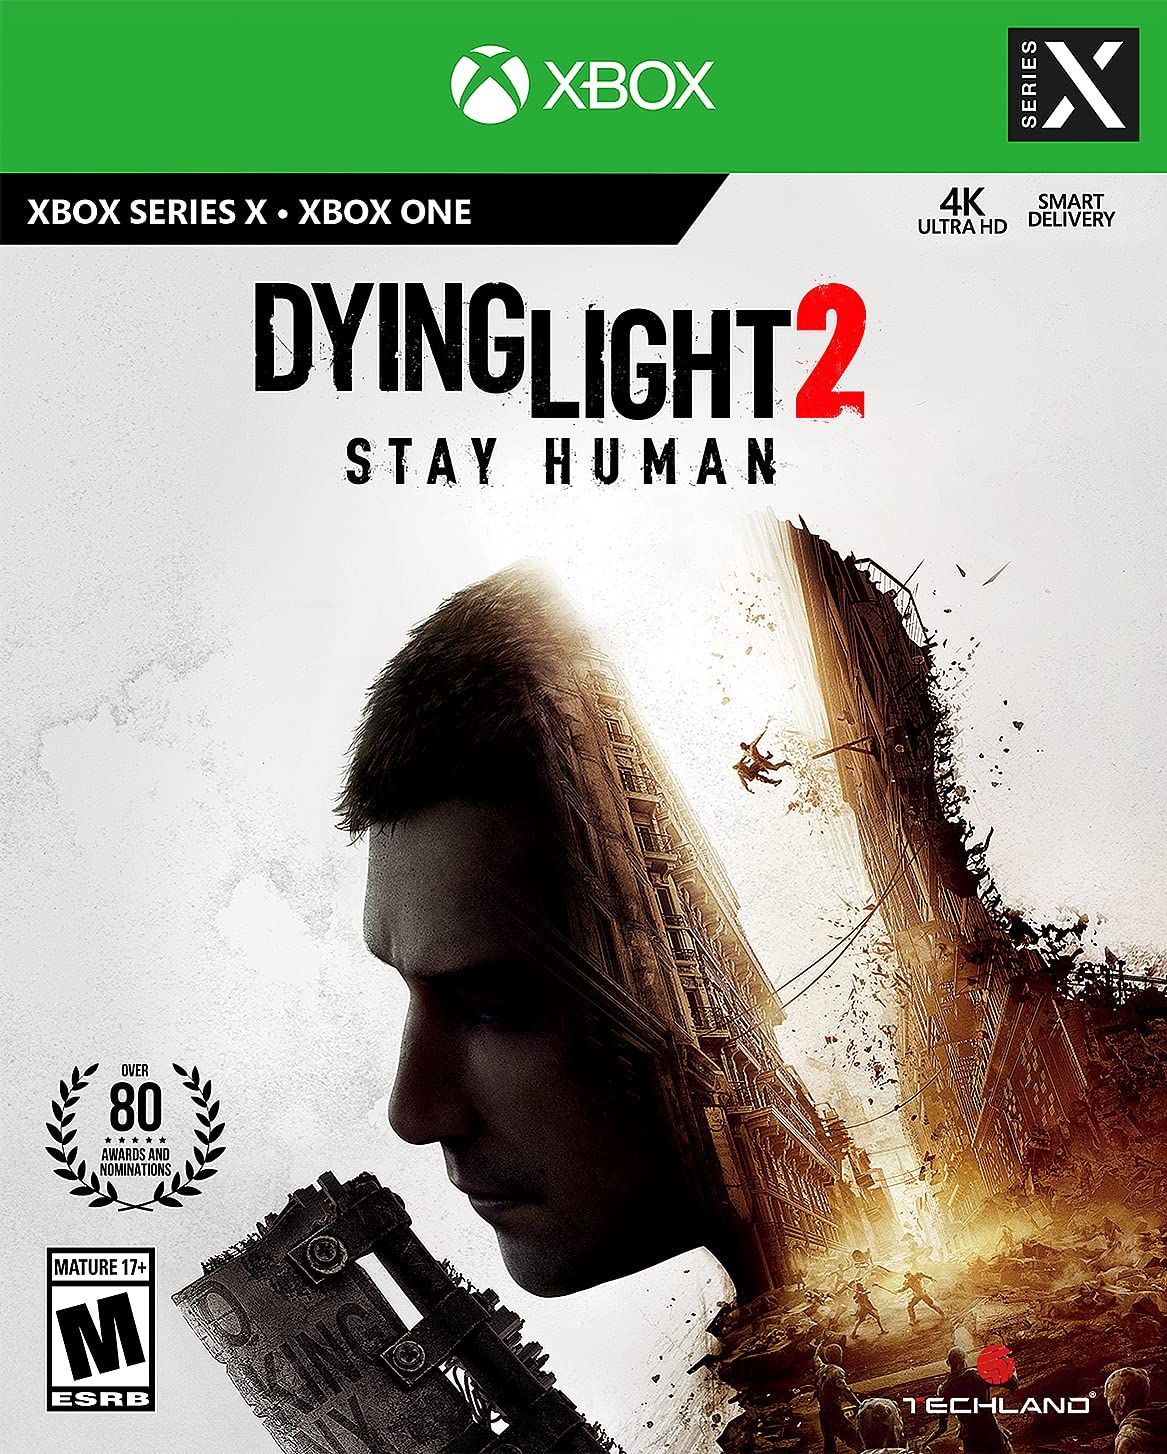 Dying Light 2 cover with a man's head cleaved in two and a figure repelling down one side into a decript cityscape